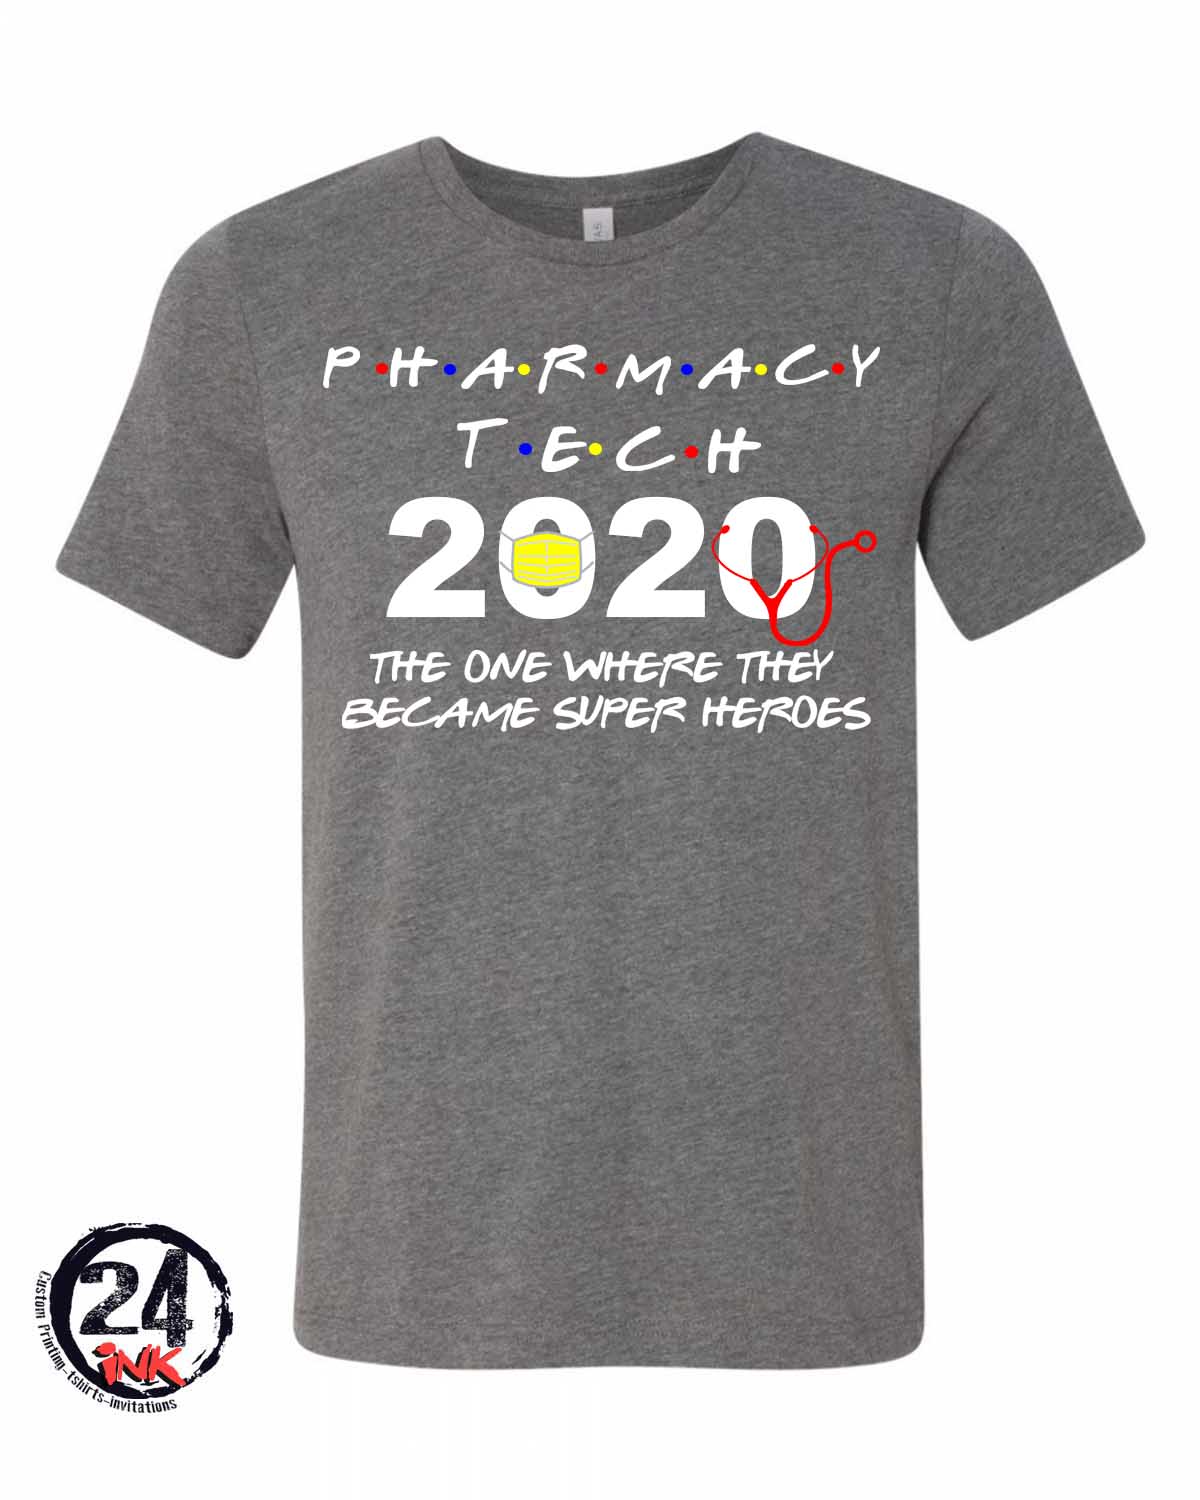 Friends Pharmacy Tech (or any wording)  T Shirt